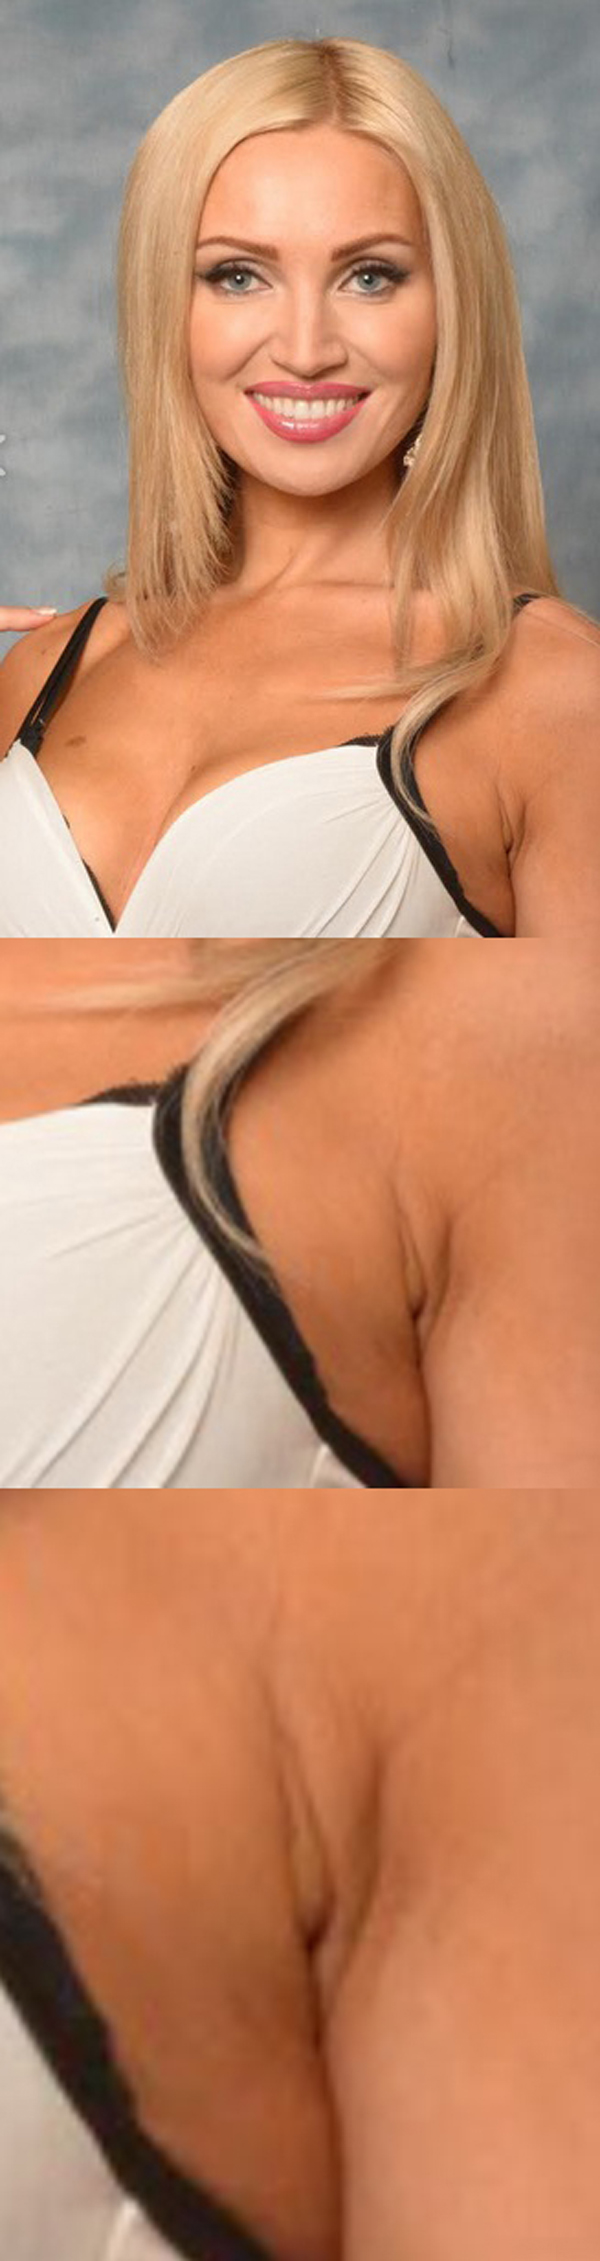 A photo of a woman with a cleavage.